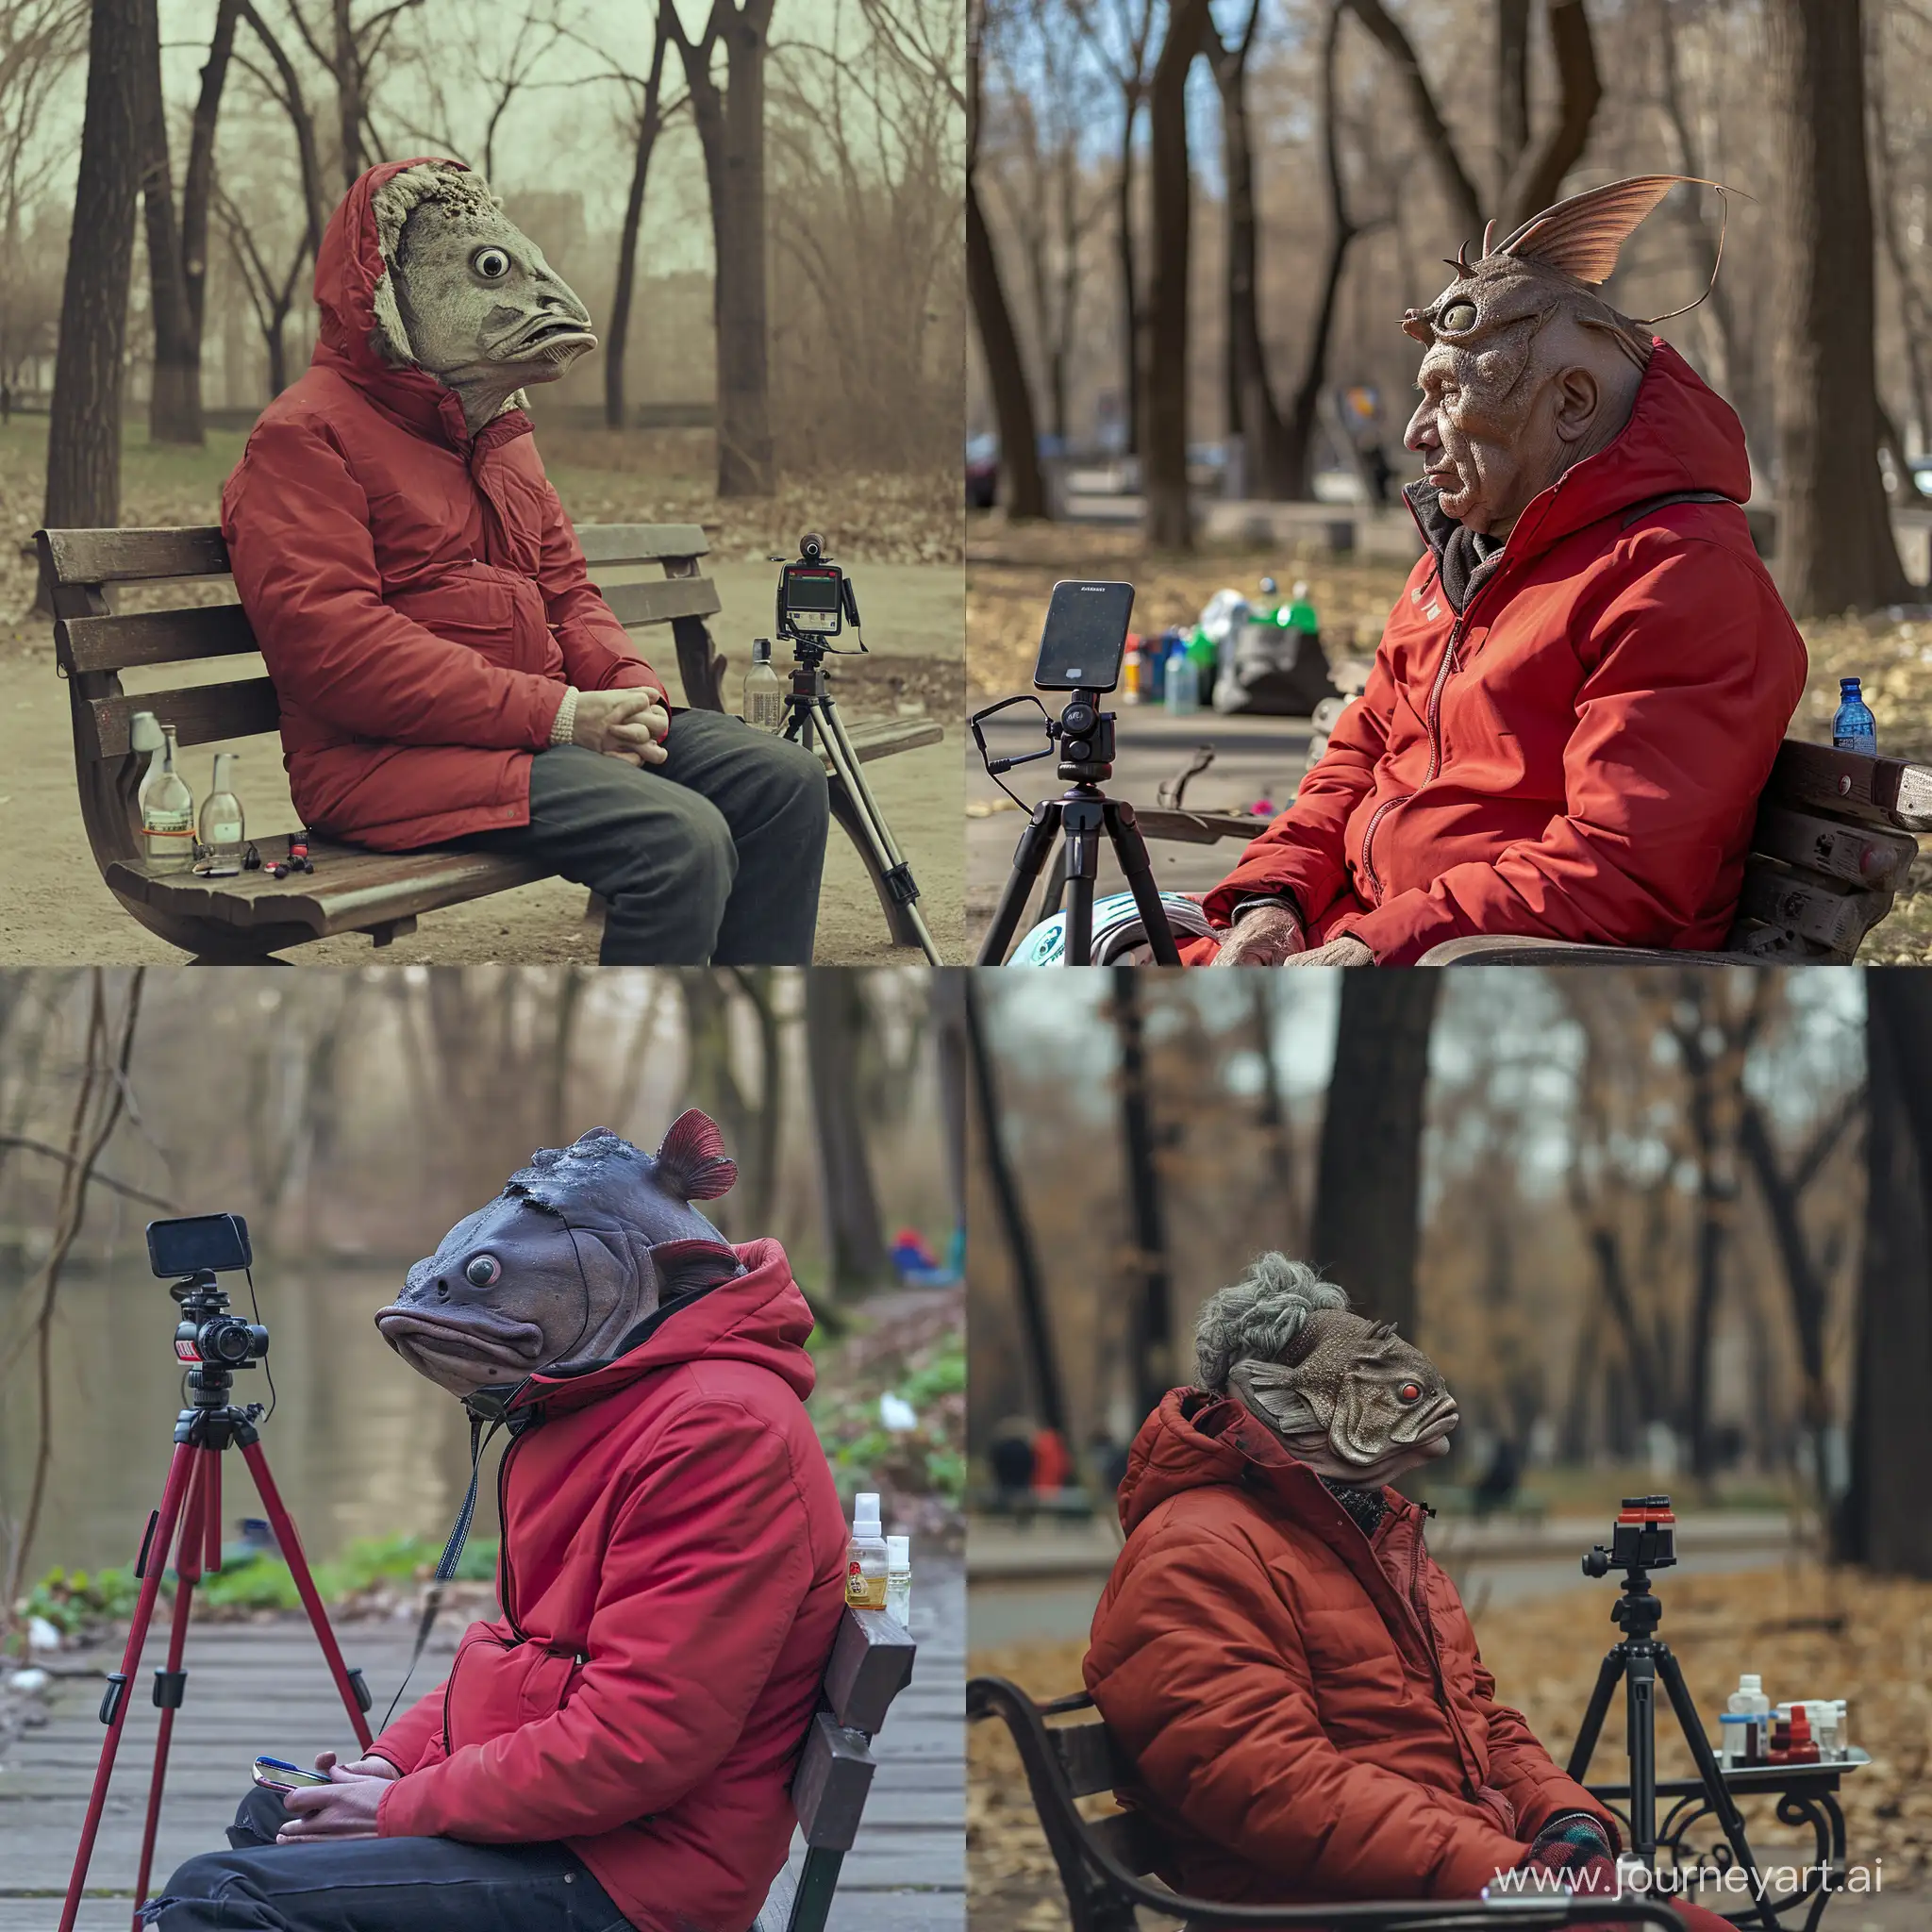 Man-with-Catfish-Head-Sitting-on-Park-Bench-with-iPhone-Tripod